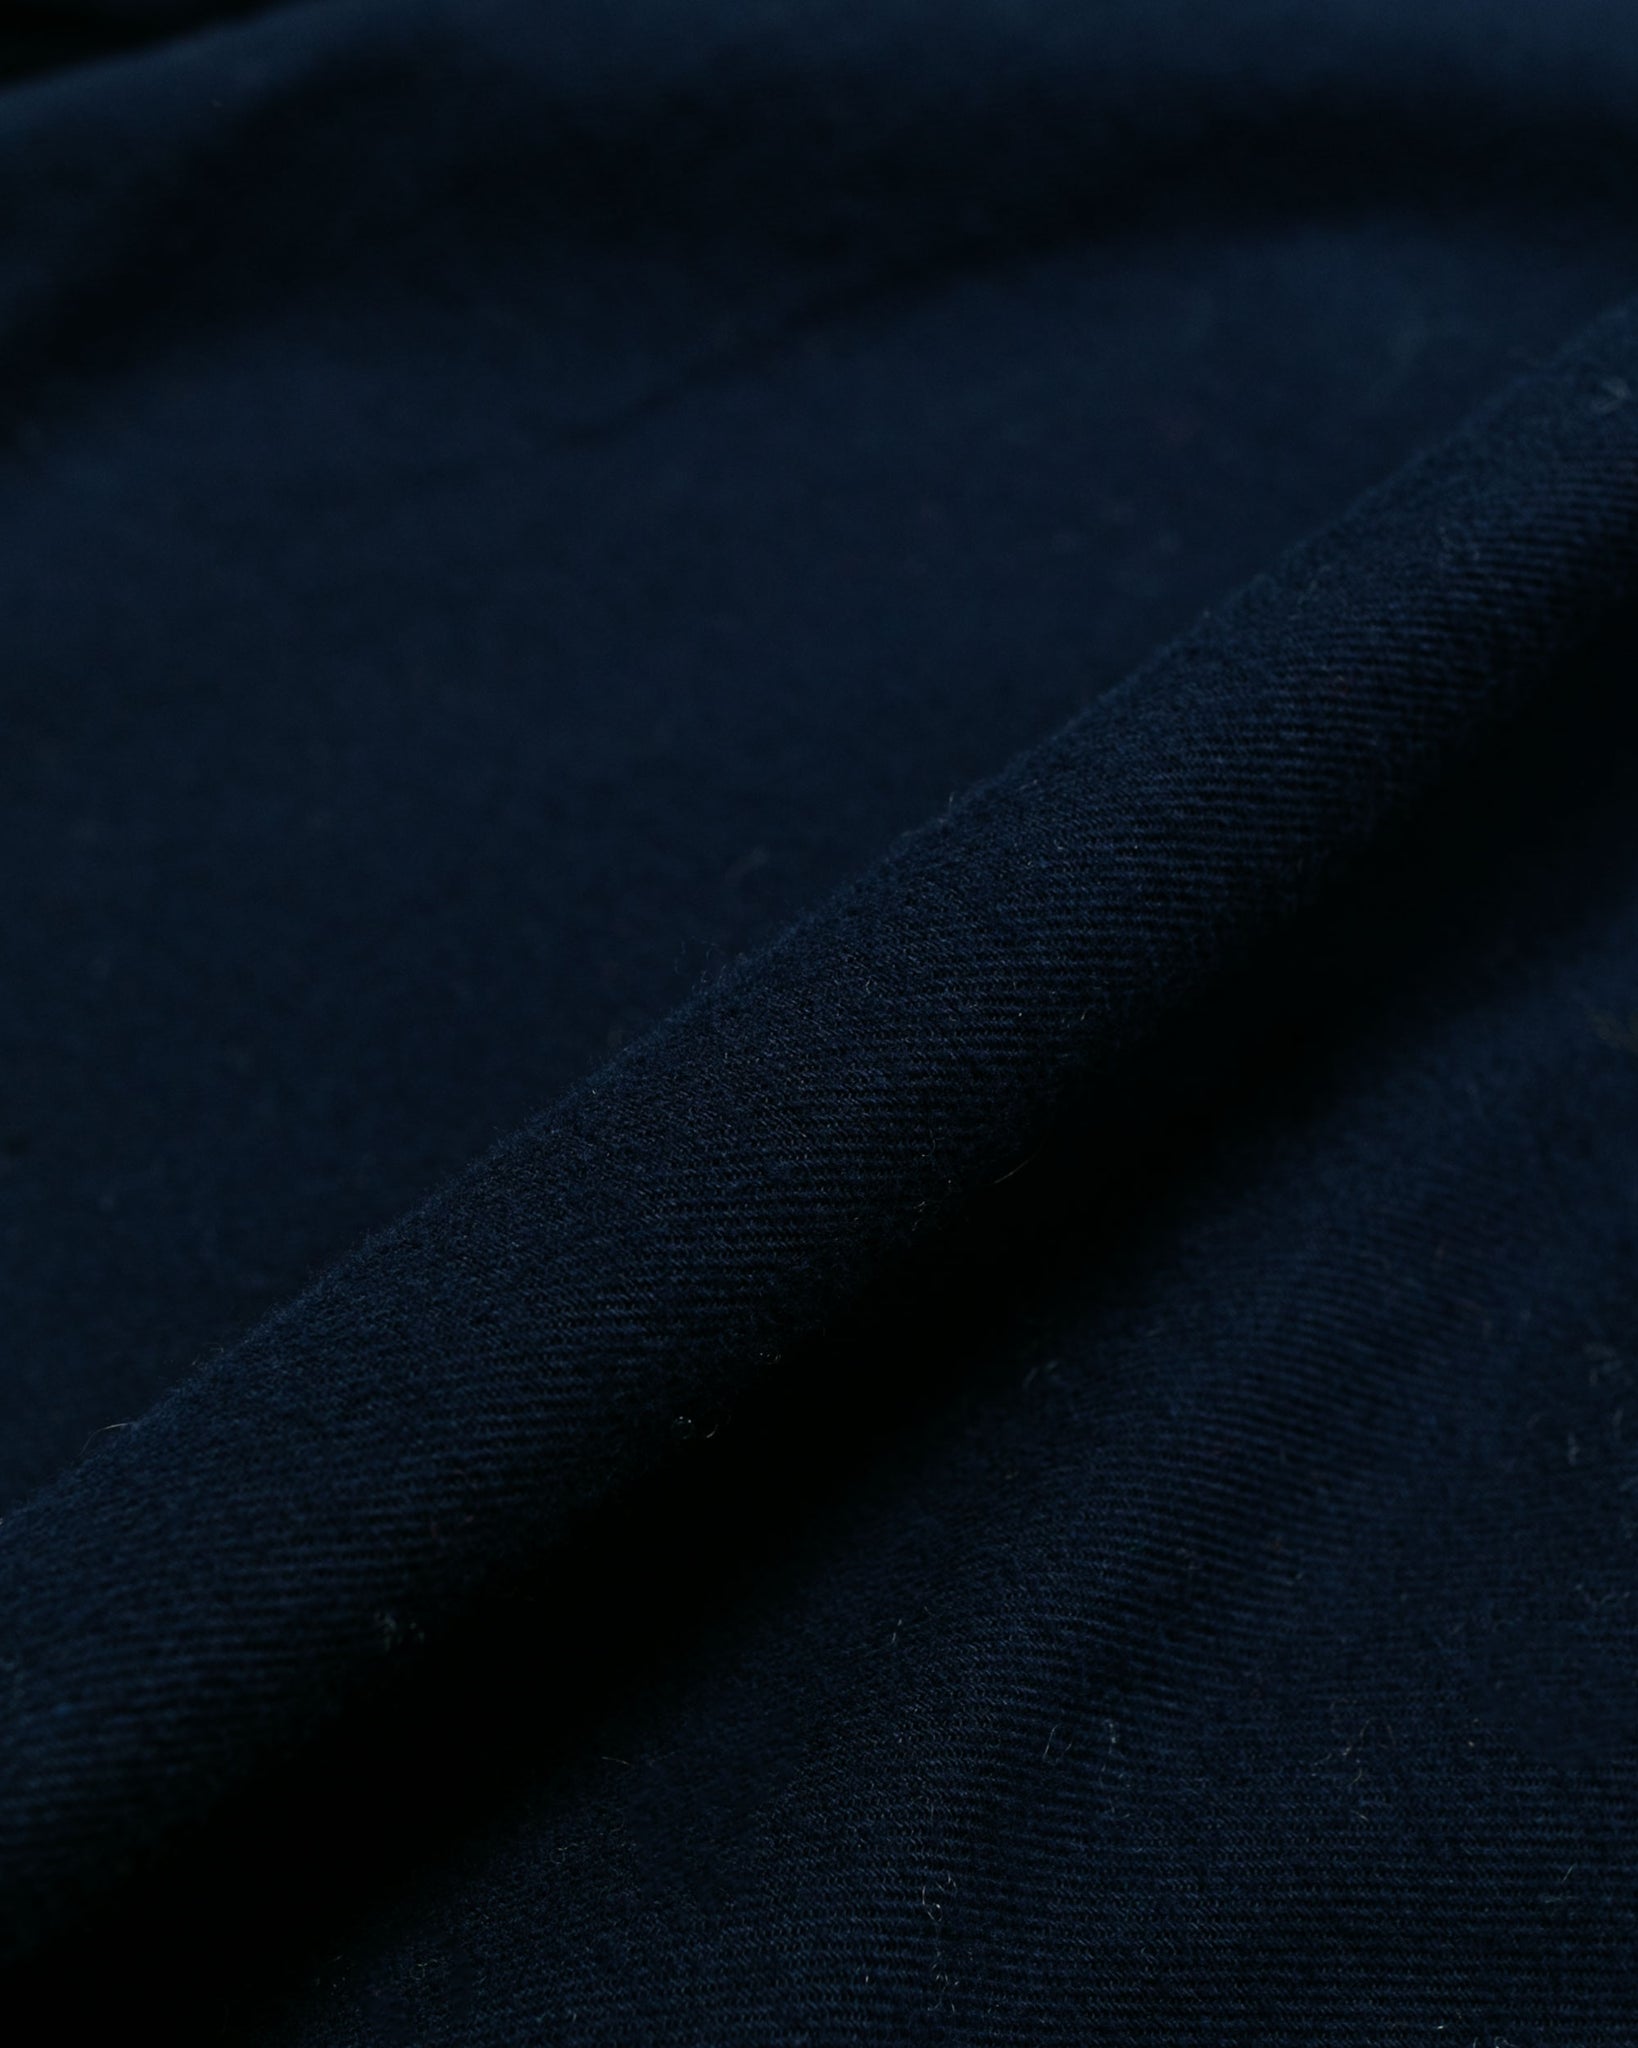 Beams Plus B.D. Flannel Solid Navy fabric